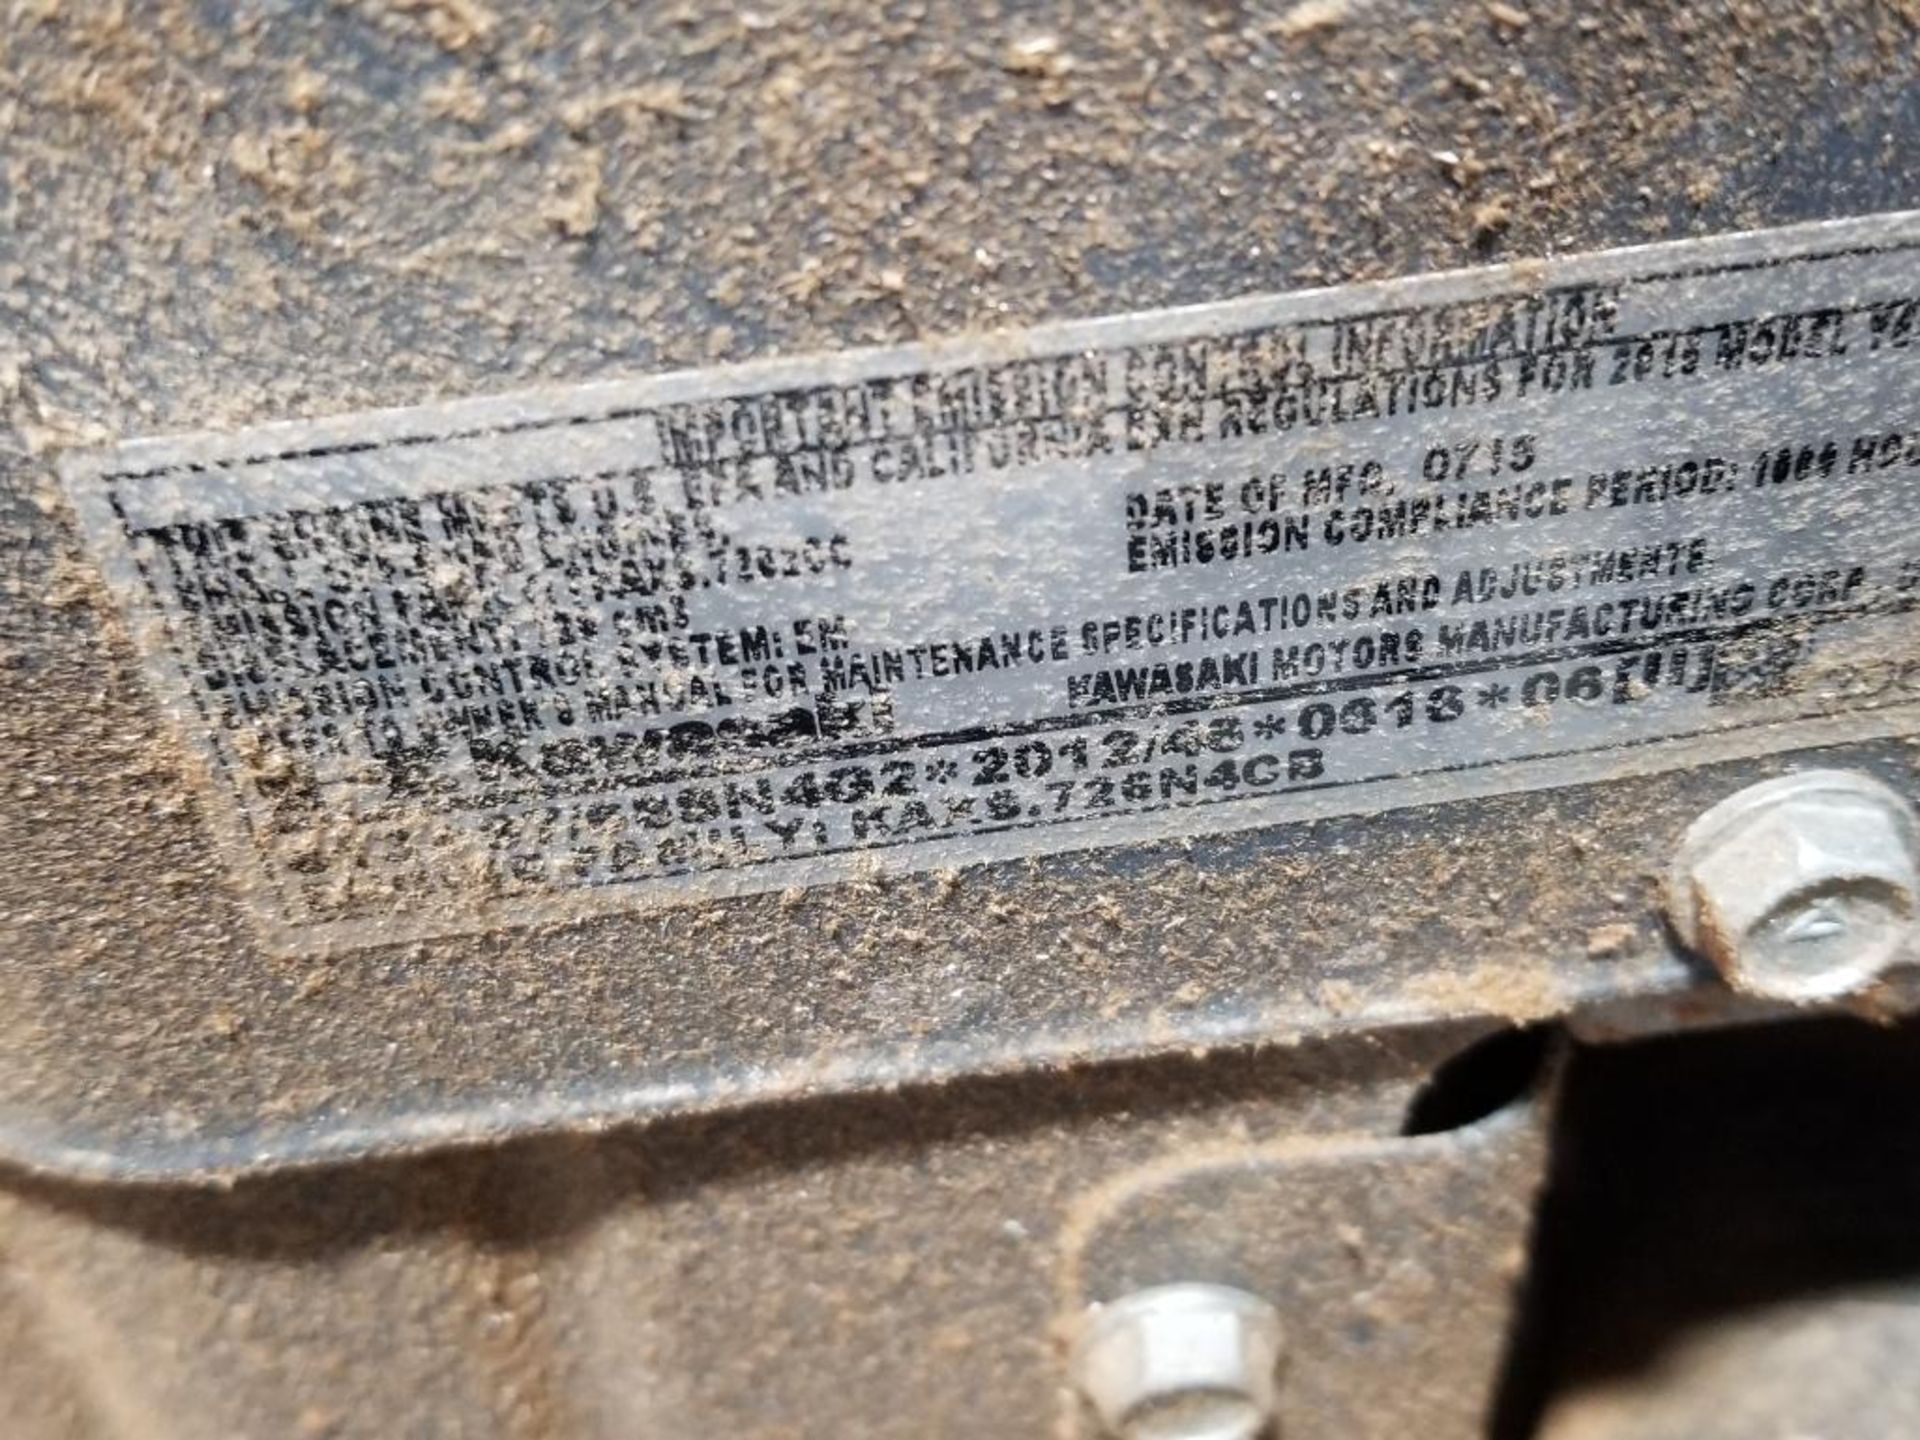 60in Exmark walk behind mower. Kawasaki 22hp engine. Working condition unknown. Battery is dead. - Image 20 of 20